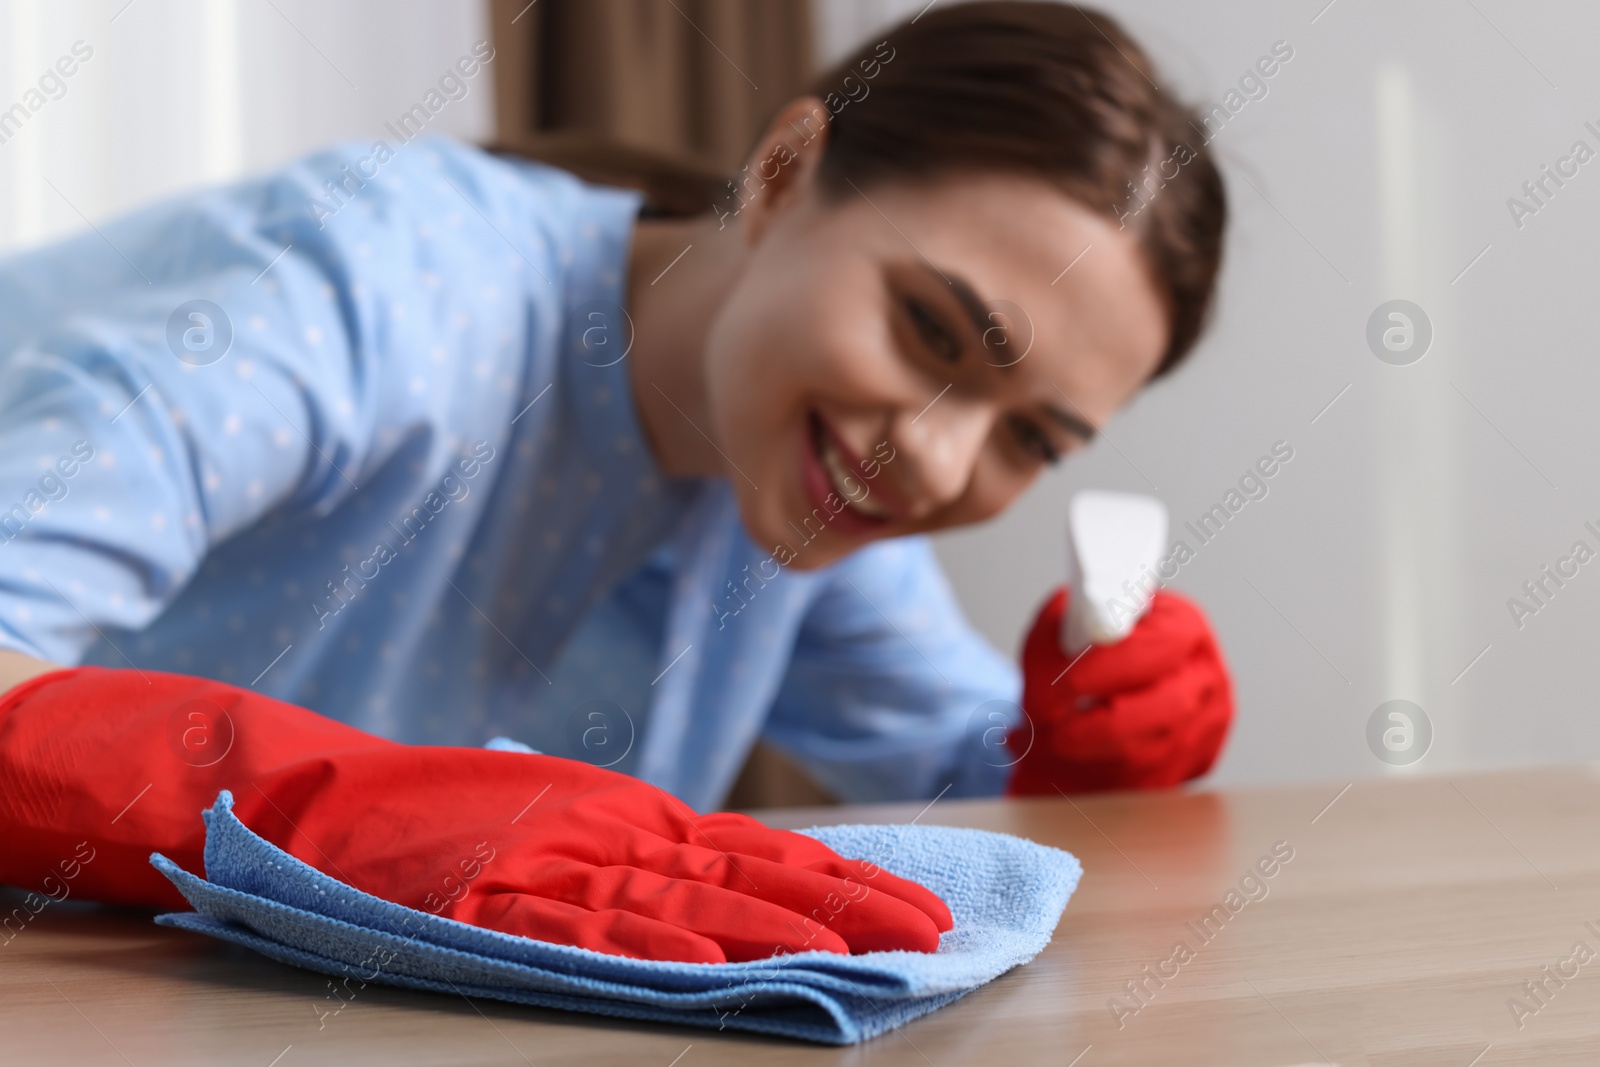 Photo of Young woman cleaning wooden table with rag at home, focus on hand